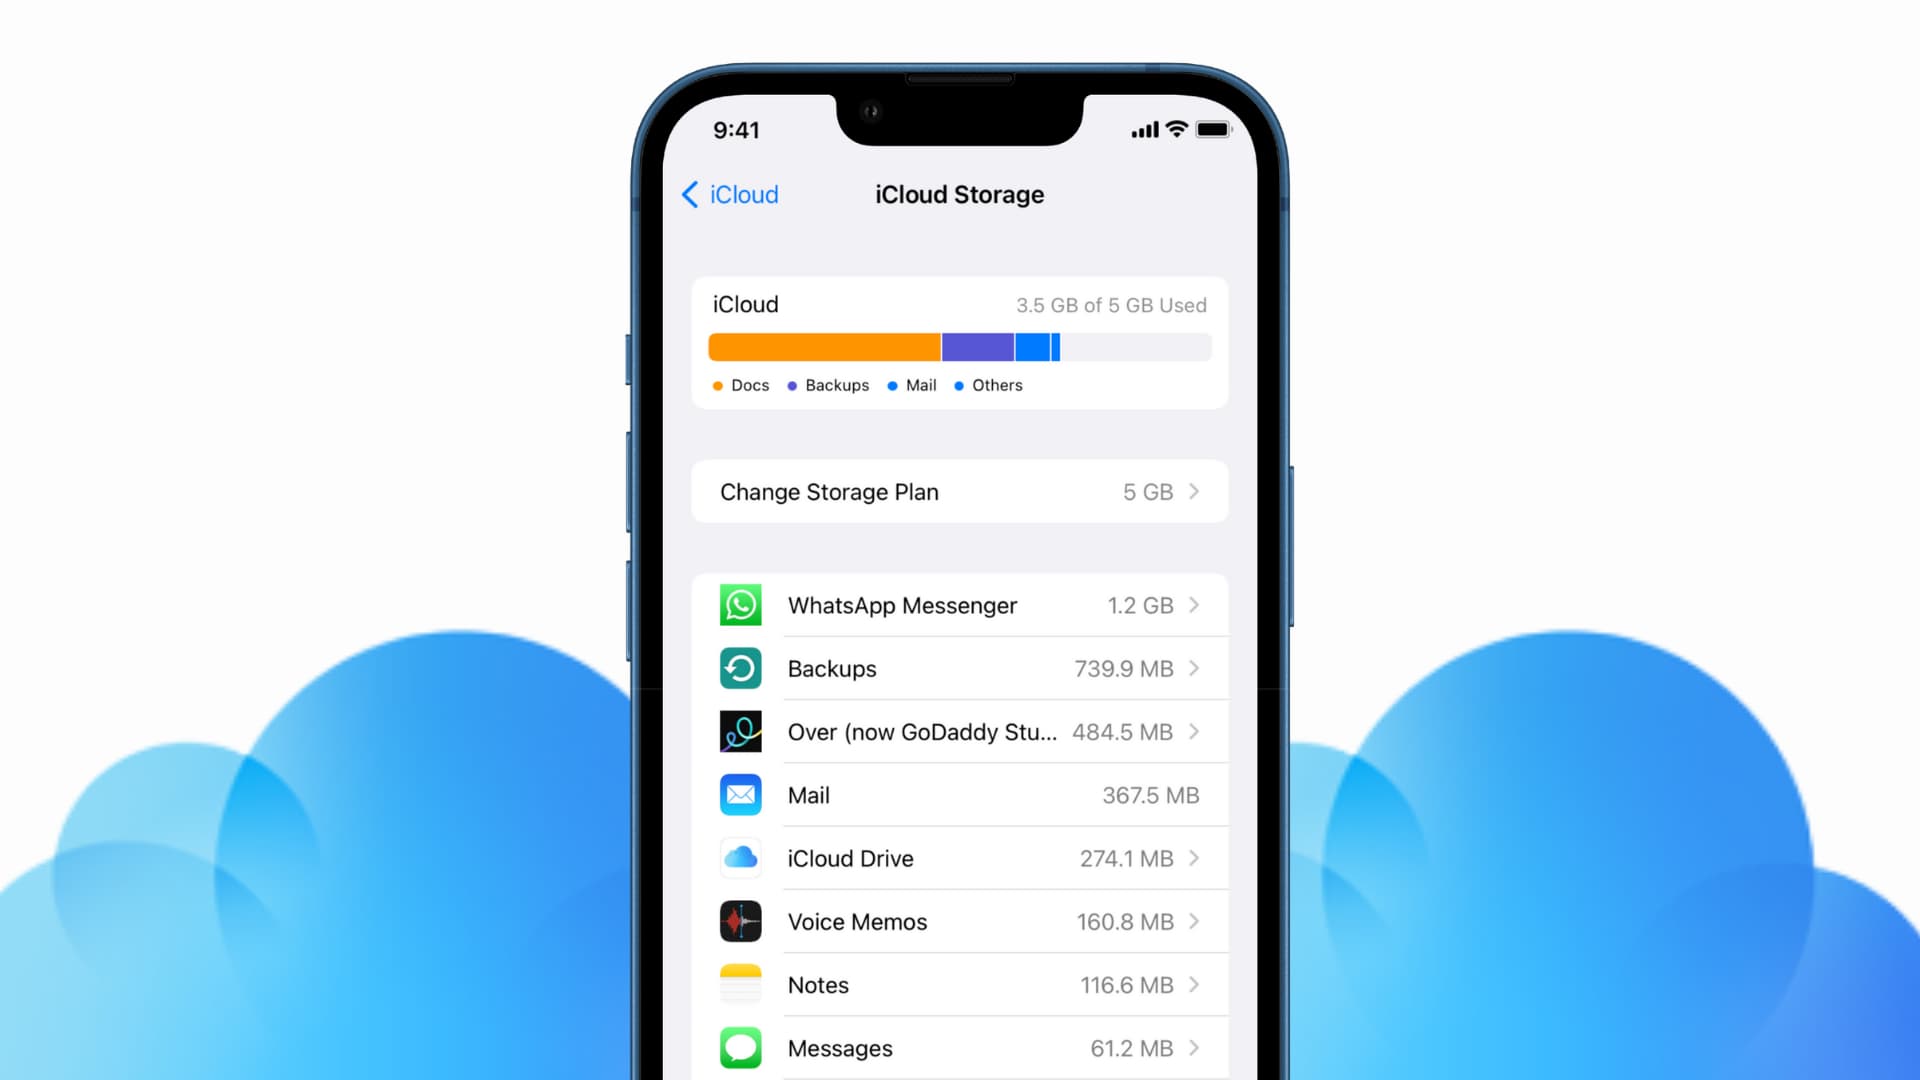 ICloud+ 50GB - 4 Months Trial Subscription US (ONLY FOR NEW ACCOUNTS)